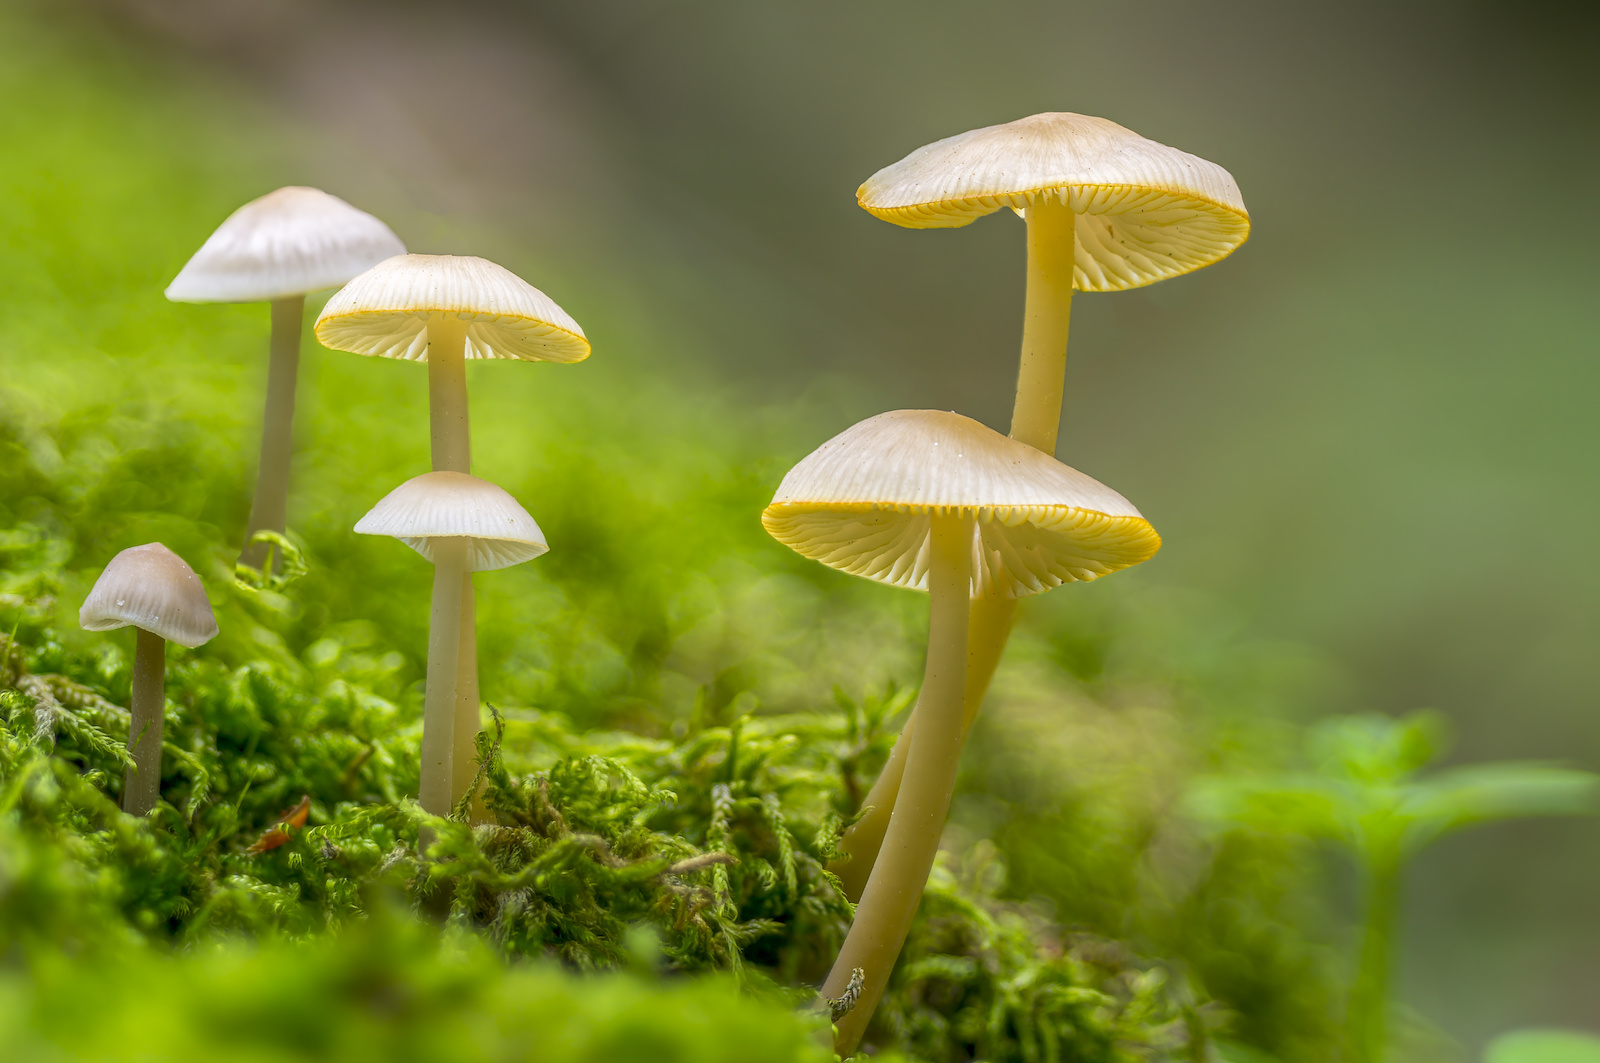 What Are Golden Tops Mushrooms? Side Effects & Risks of Using Magic Mushrooms